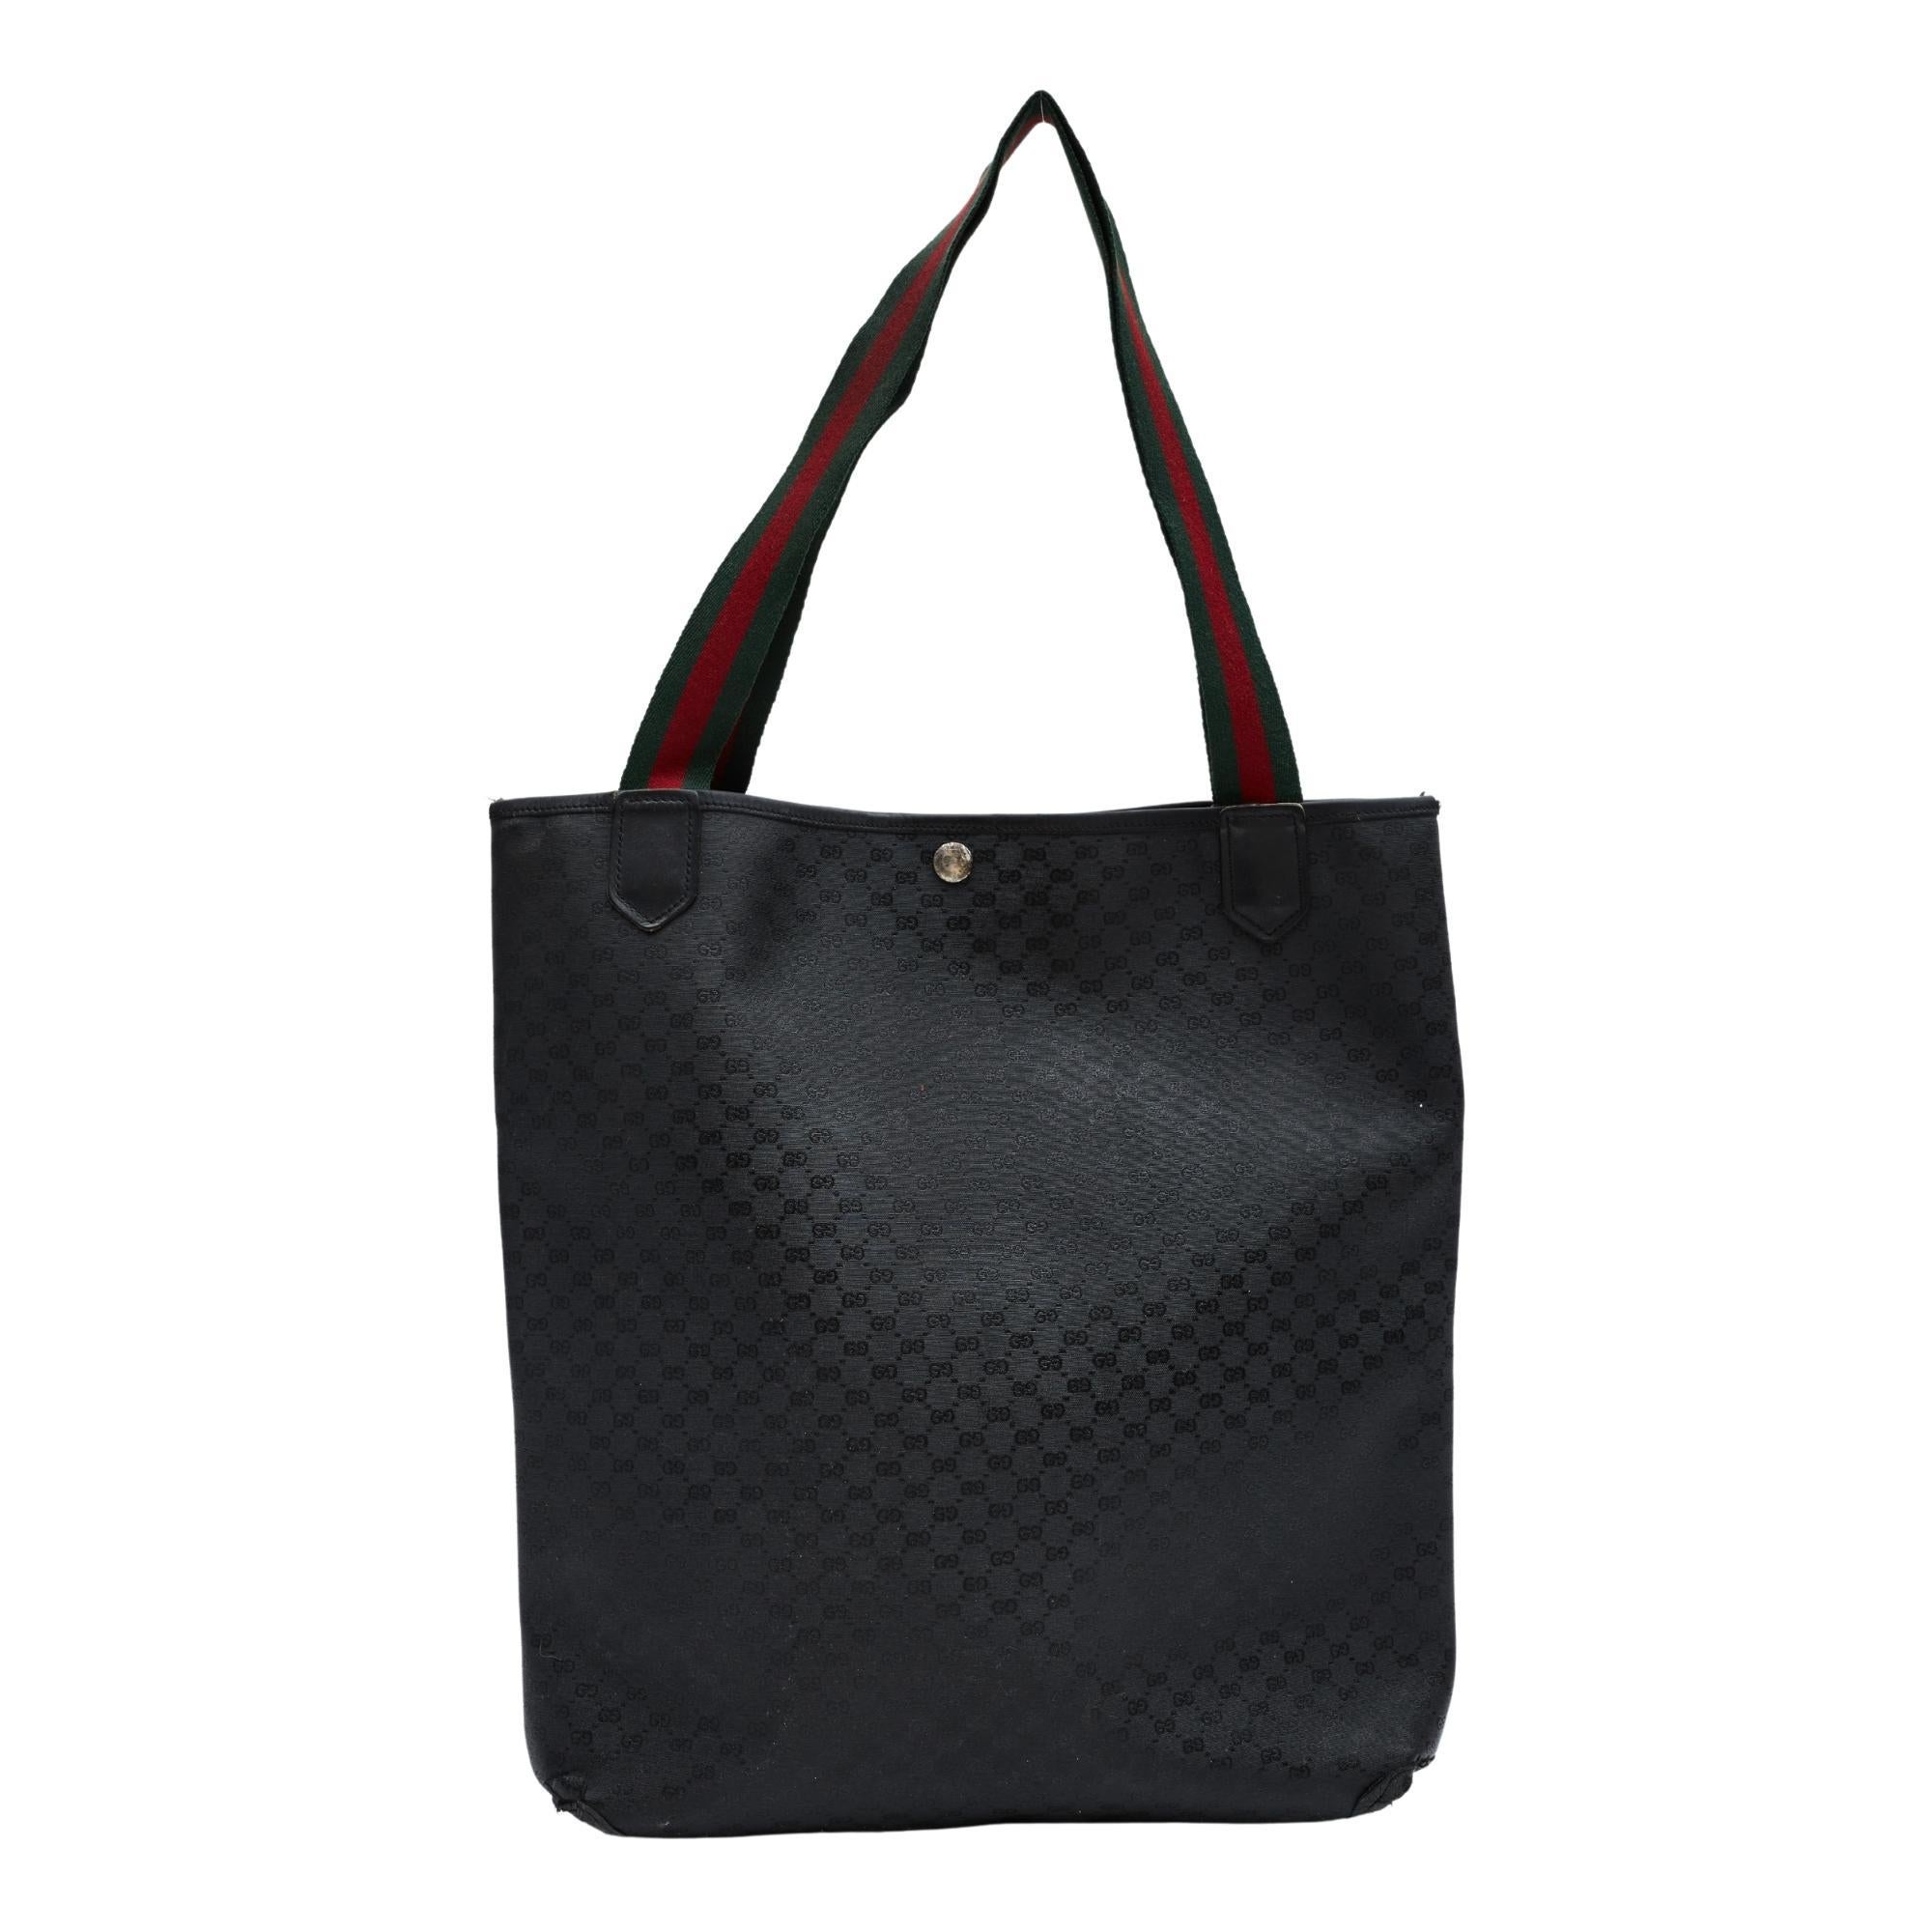 COLOR: Black
MATERIAL: Coated canvas
MEASURES: H 15” x L 15” x D 3.5”
DROP: 10”
CONDITION: Fair - professionally refurbished bag. Small rip at button closure at top has been repaired, marks to interior, exterior has been dyed. The dye rubs off on